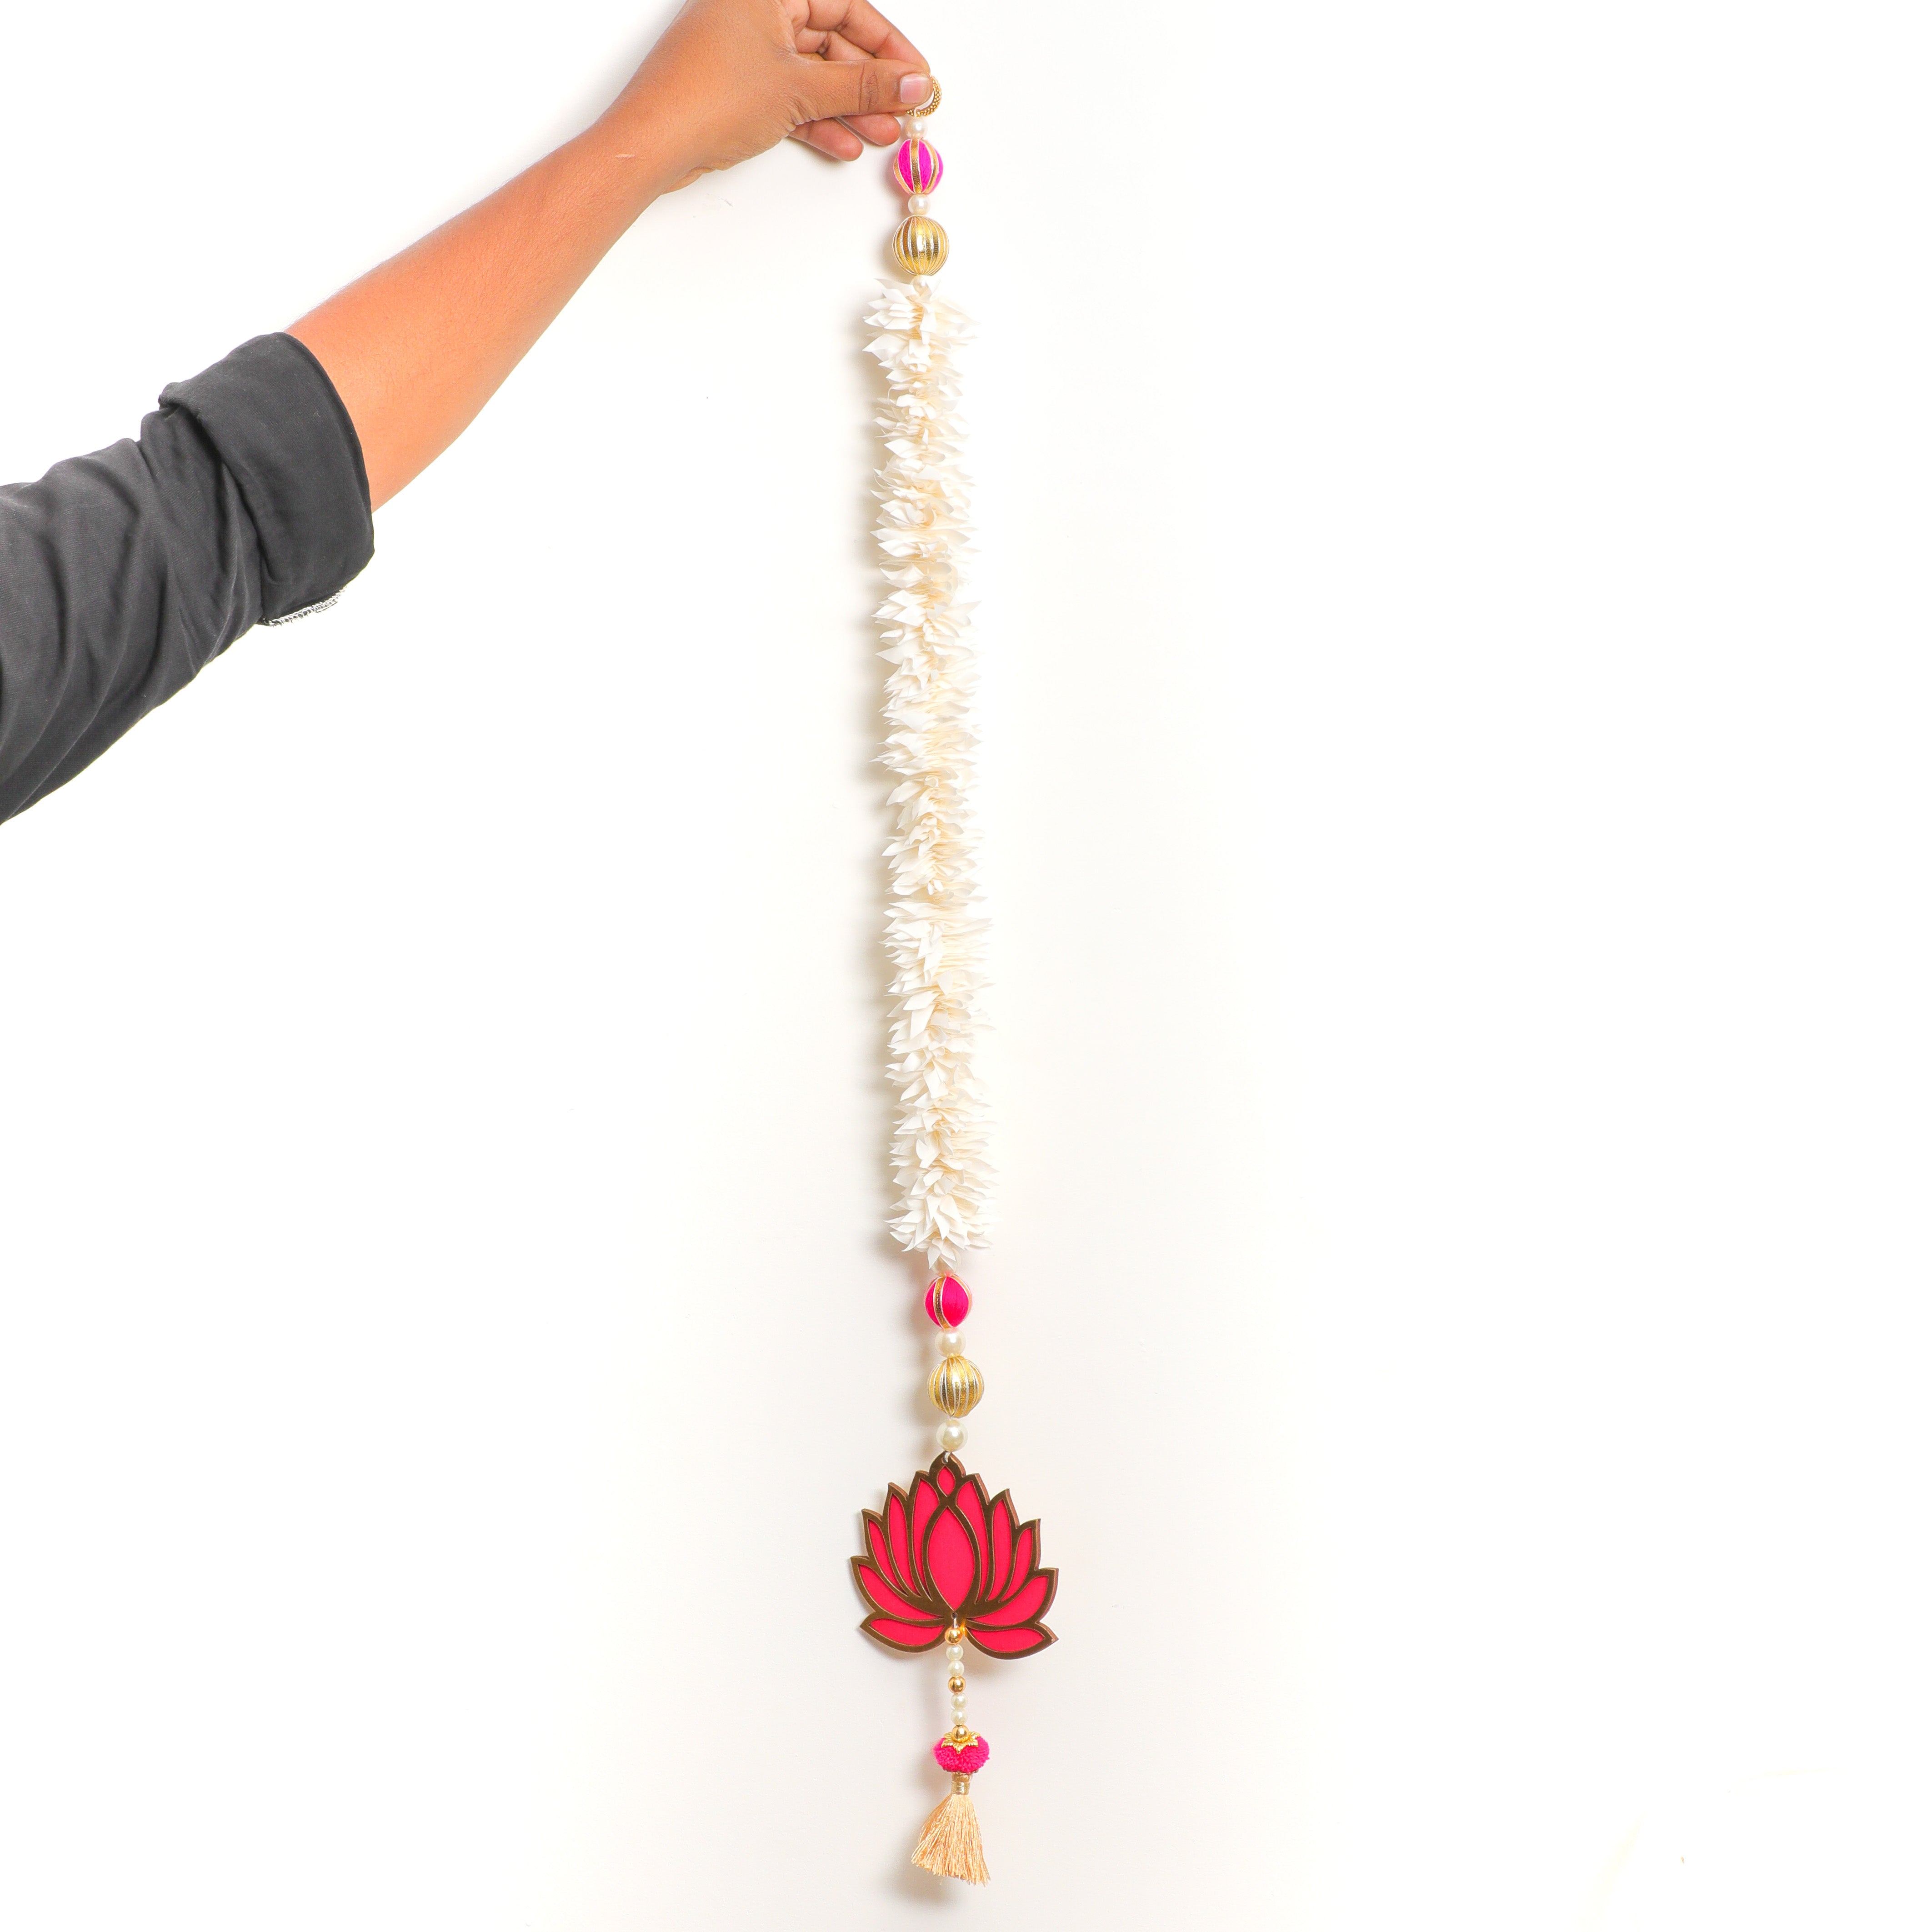 The pink and gold lotus hanging can be used for uplifting the decor at all festivities